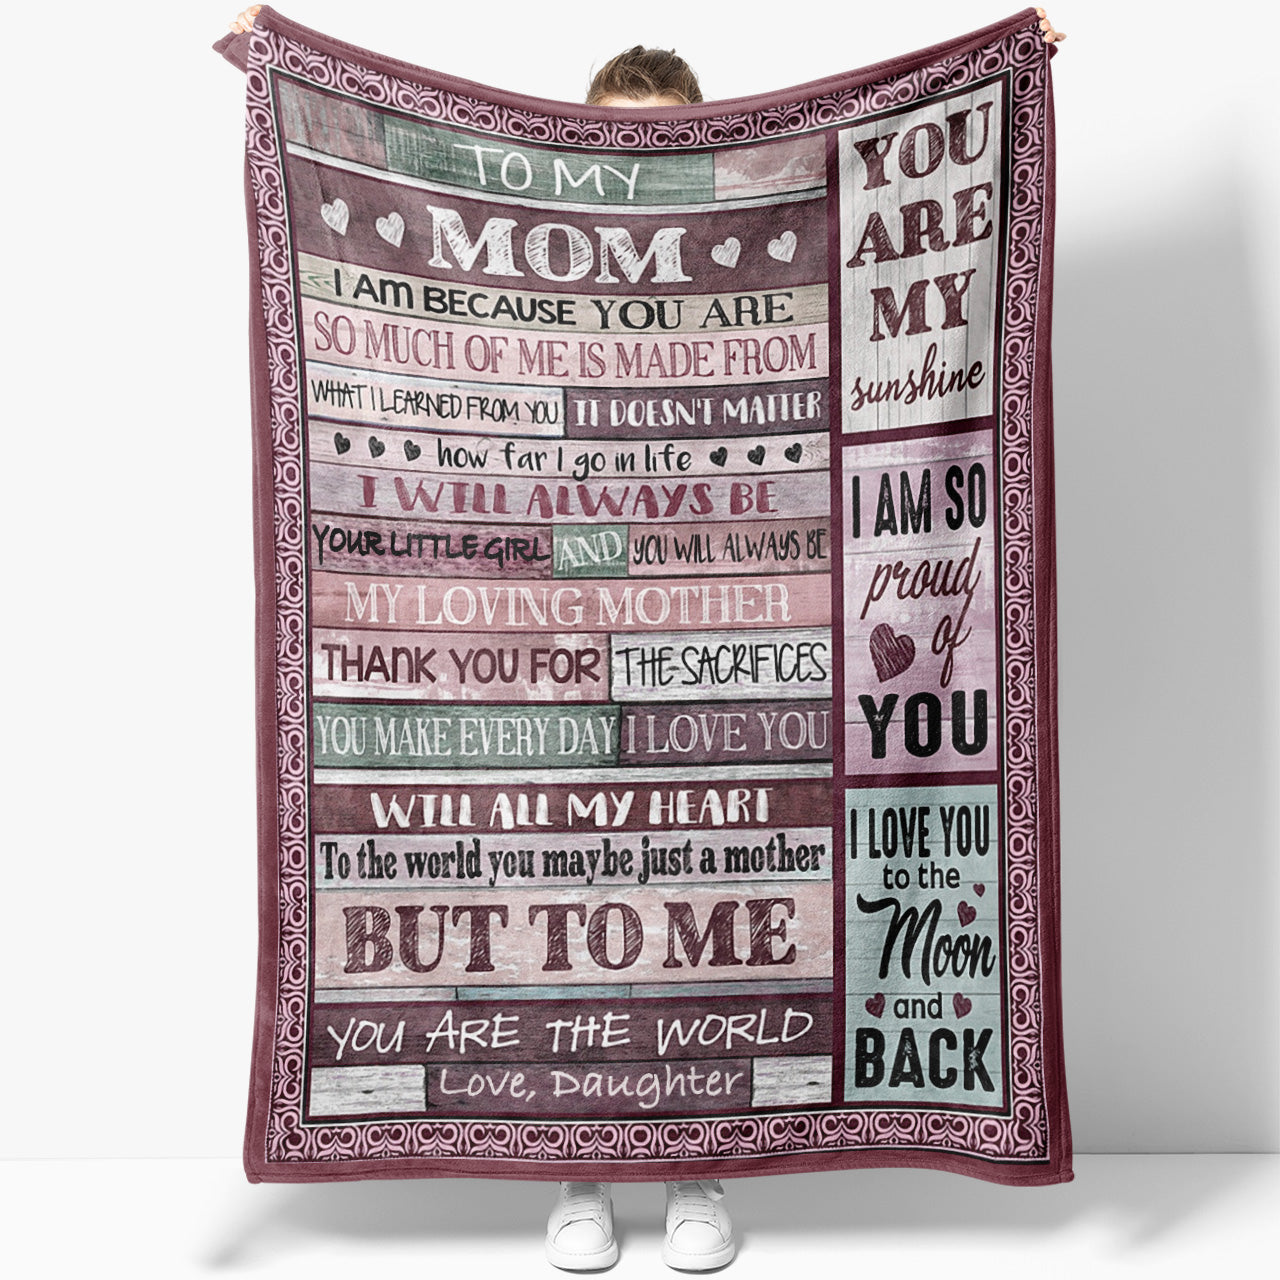 Blanket Gift Ideas For Mom, Good Mothers Day Gifts Ideas, You Are, Mother  Christmas Gifts, Funny Gifts For Mom, Things To Get Your Mom, Mom's Day -  Sweet Family Gift